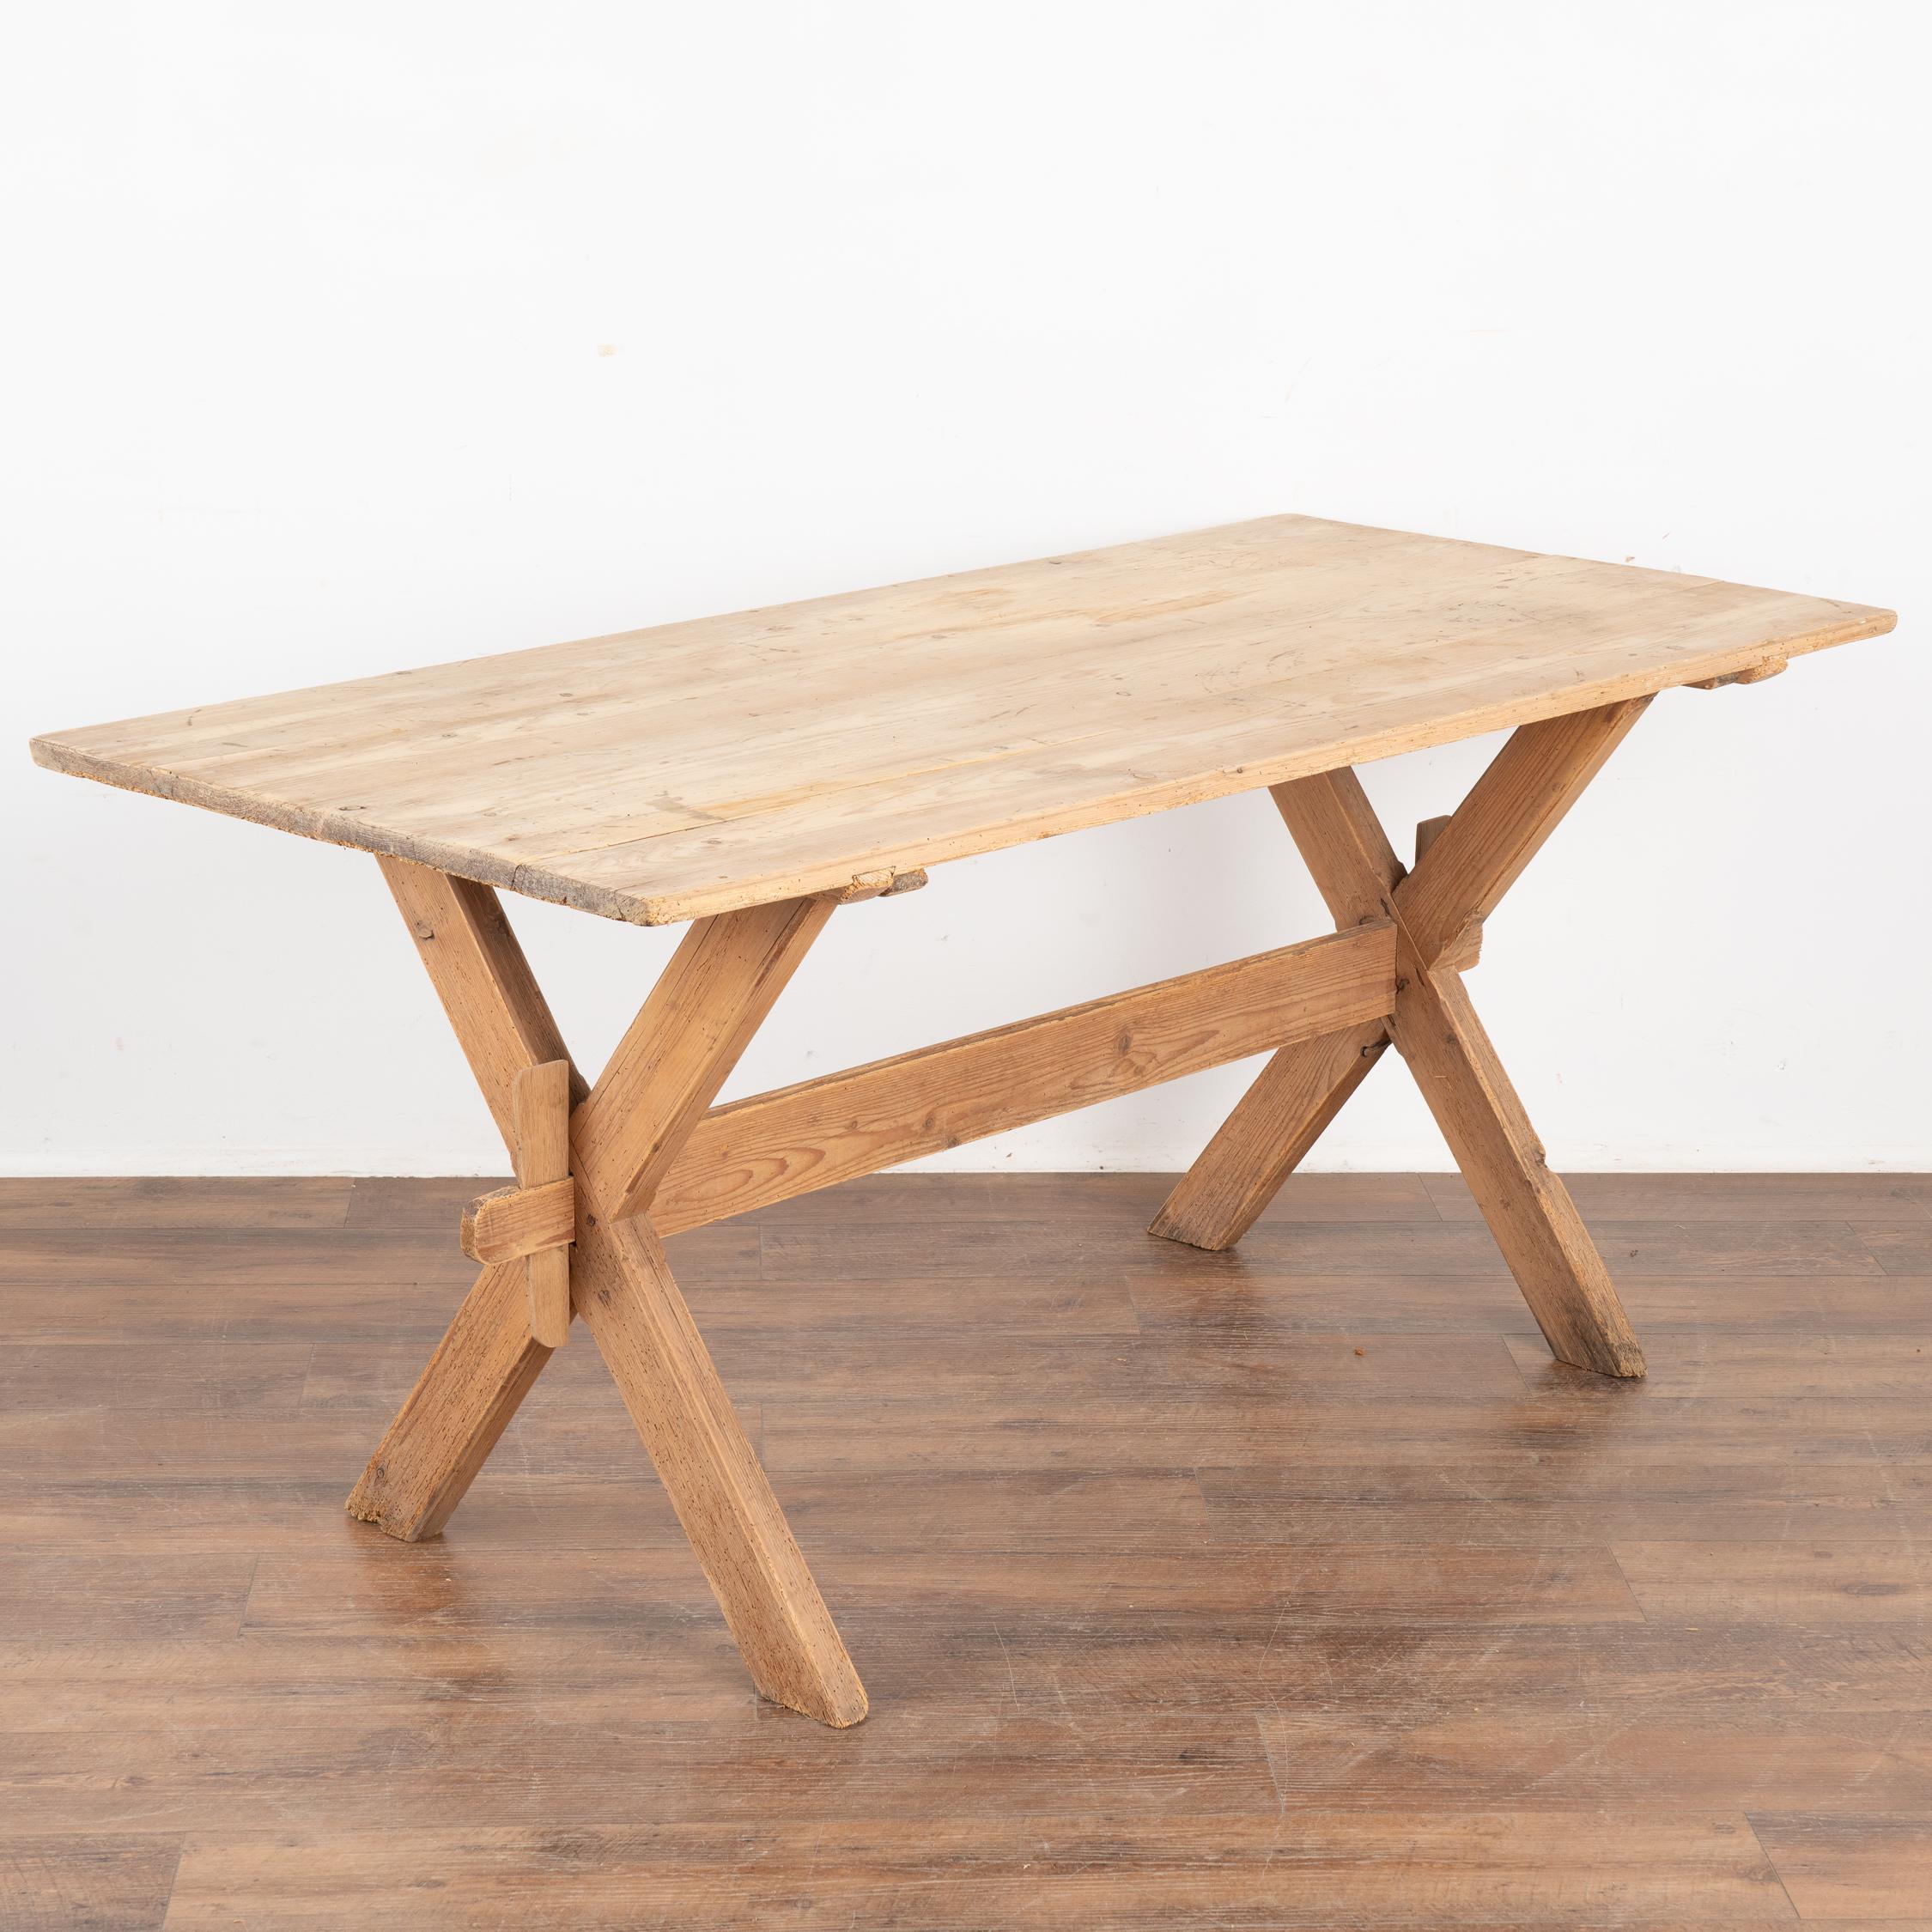 This farmhouse dining or kitchen table has European country charm thanks to the unique X-stretcher base.
The natural pine has been distressed through generations of use, adding depth to the character of the table. The many scratches, dings, cracks,